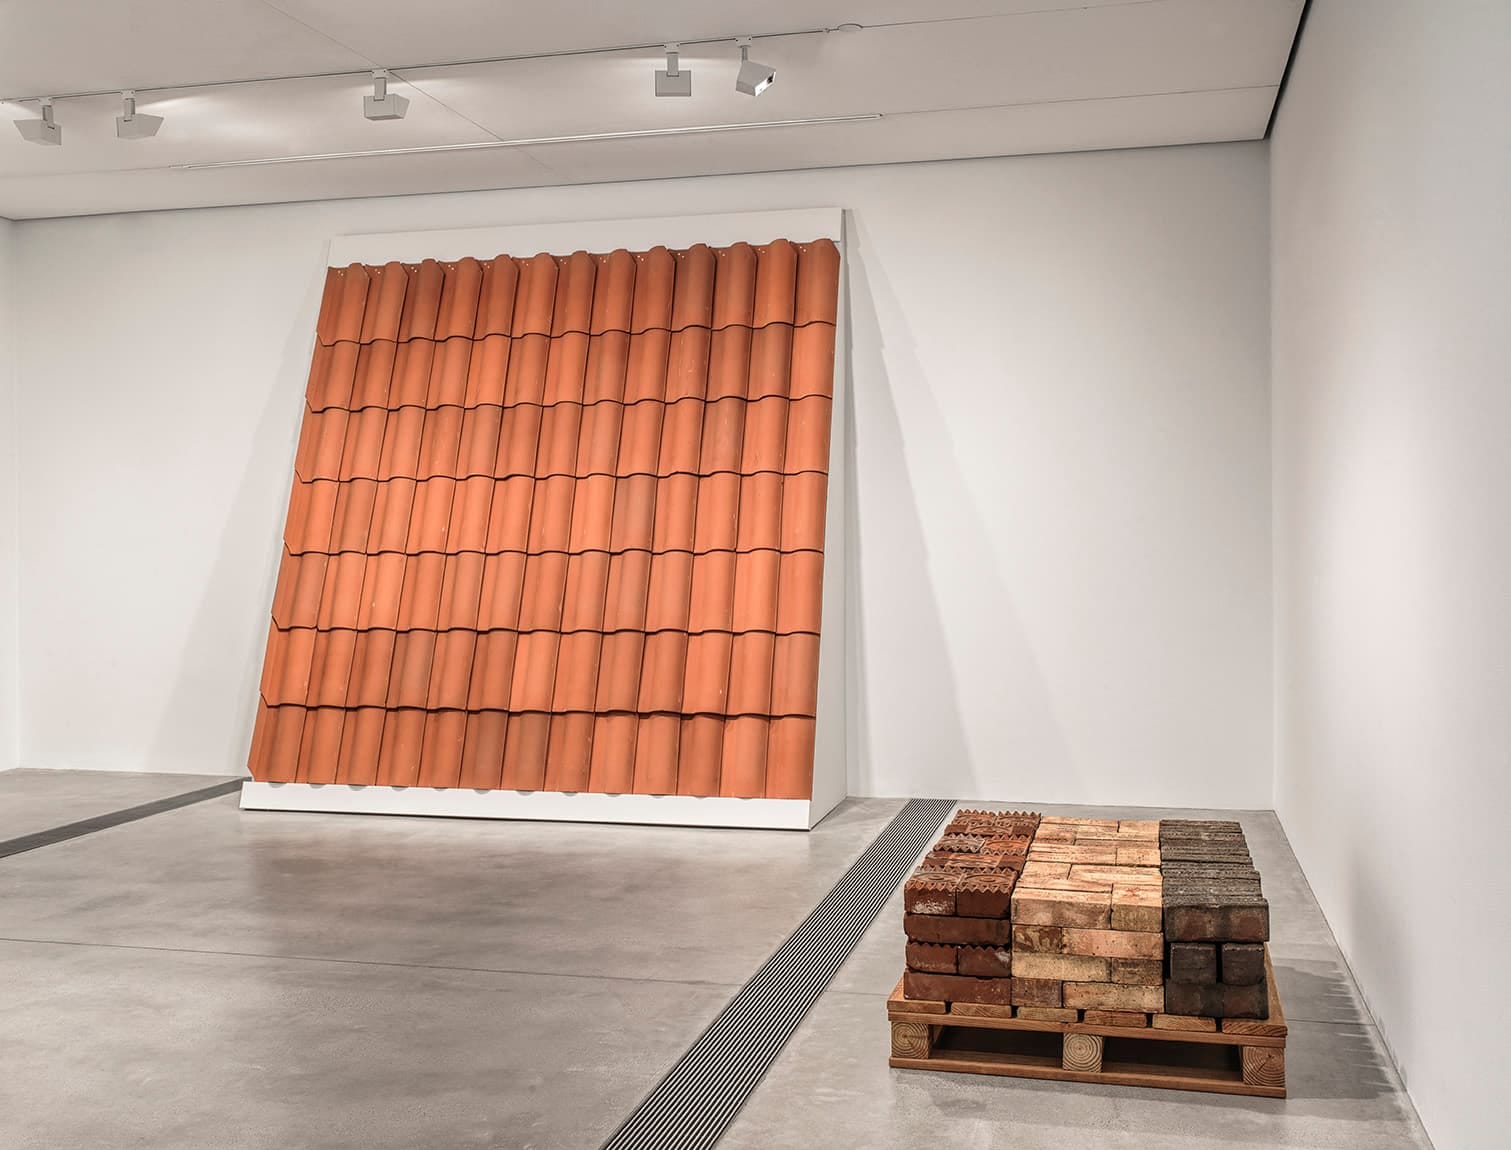 Photograph of a pallet of bricks and a tall section of terracotta roof tiles in a white-cube gallery